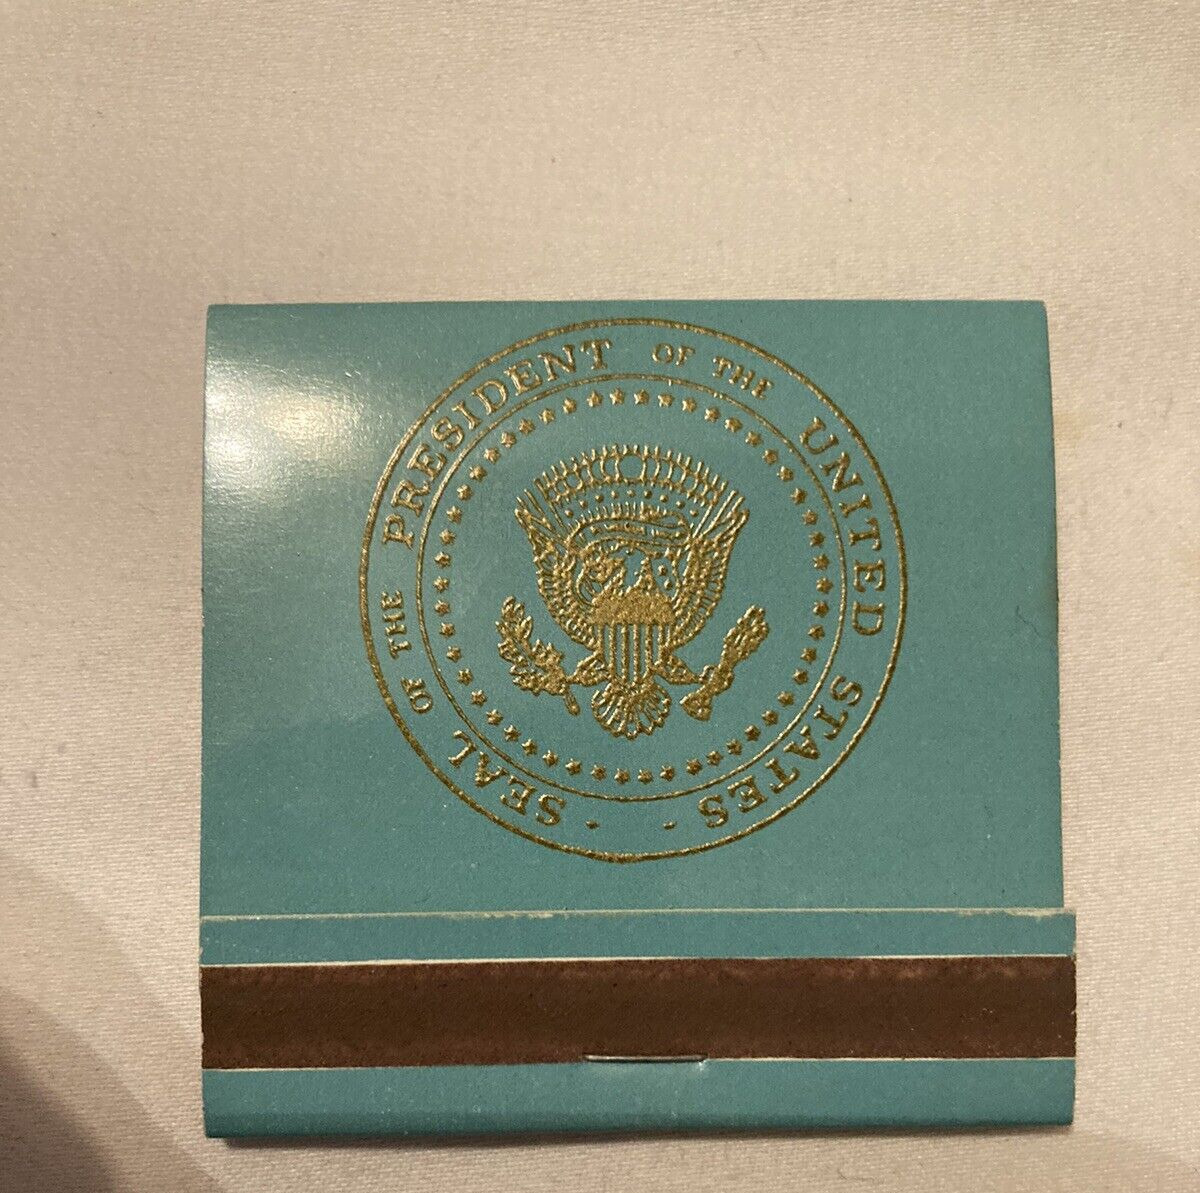 1976 U.S. Presidential Aircraft Air Force One Gerald Ford Unstruck Matchbook...